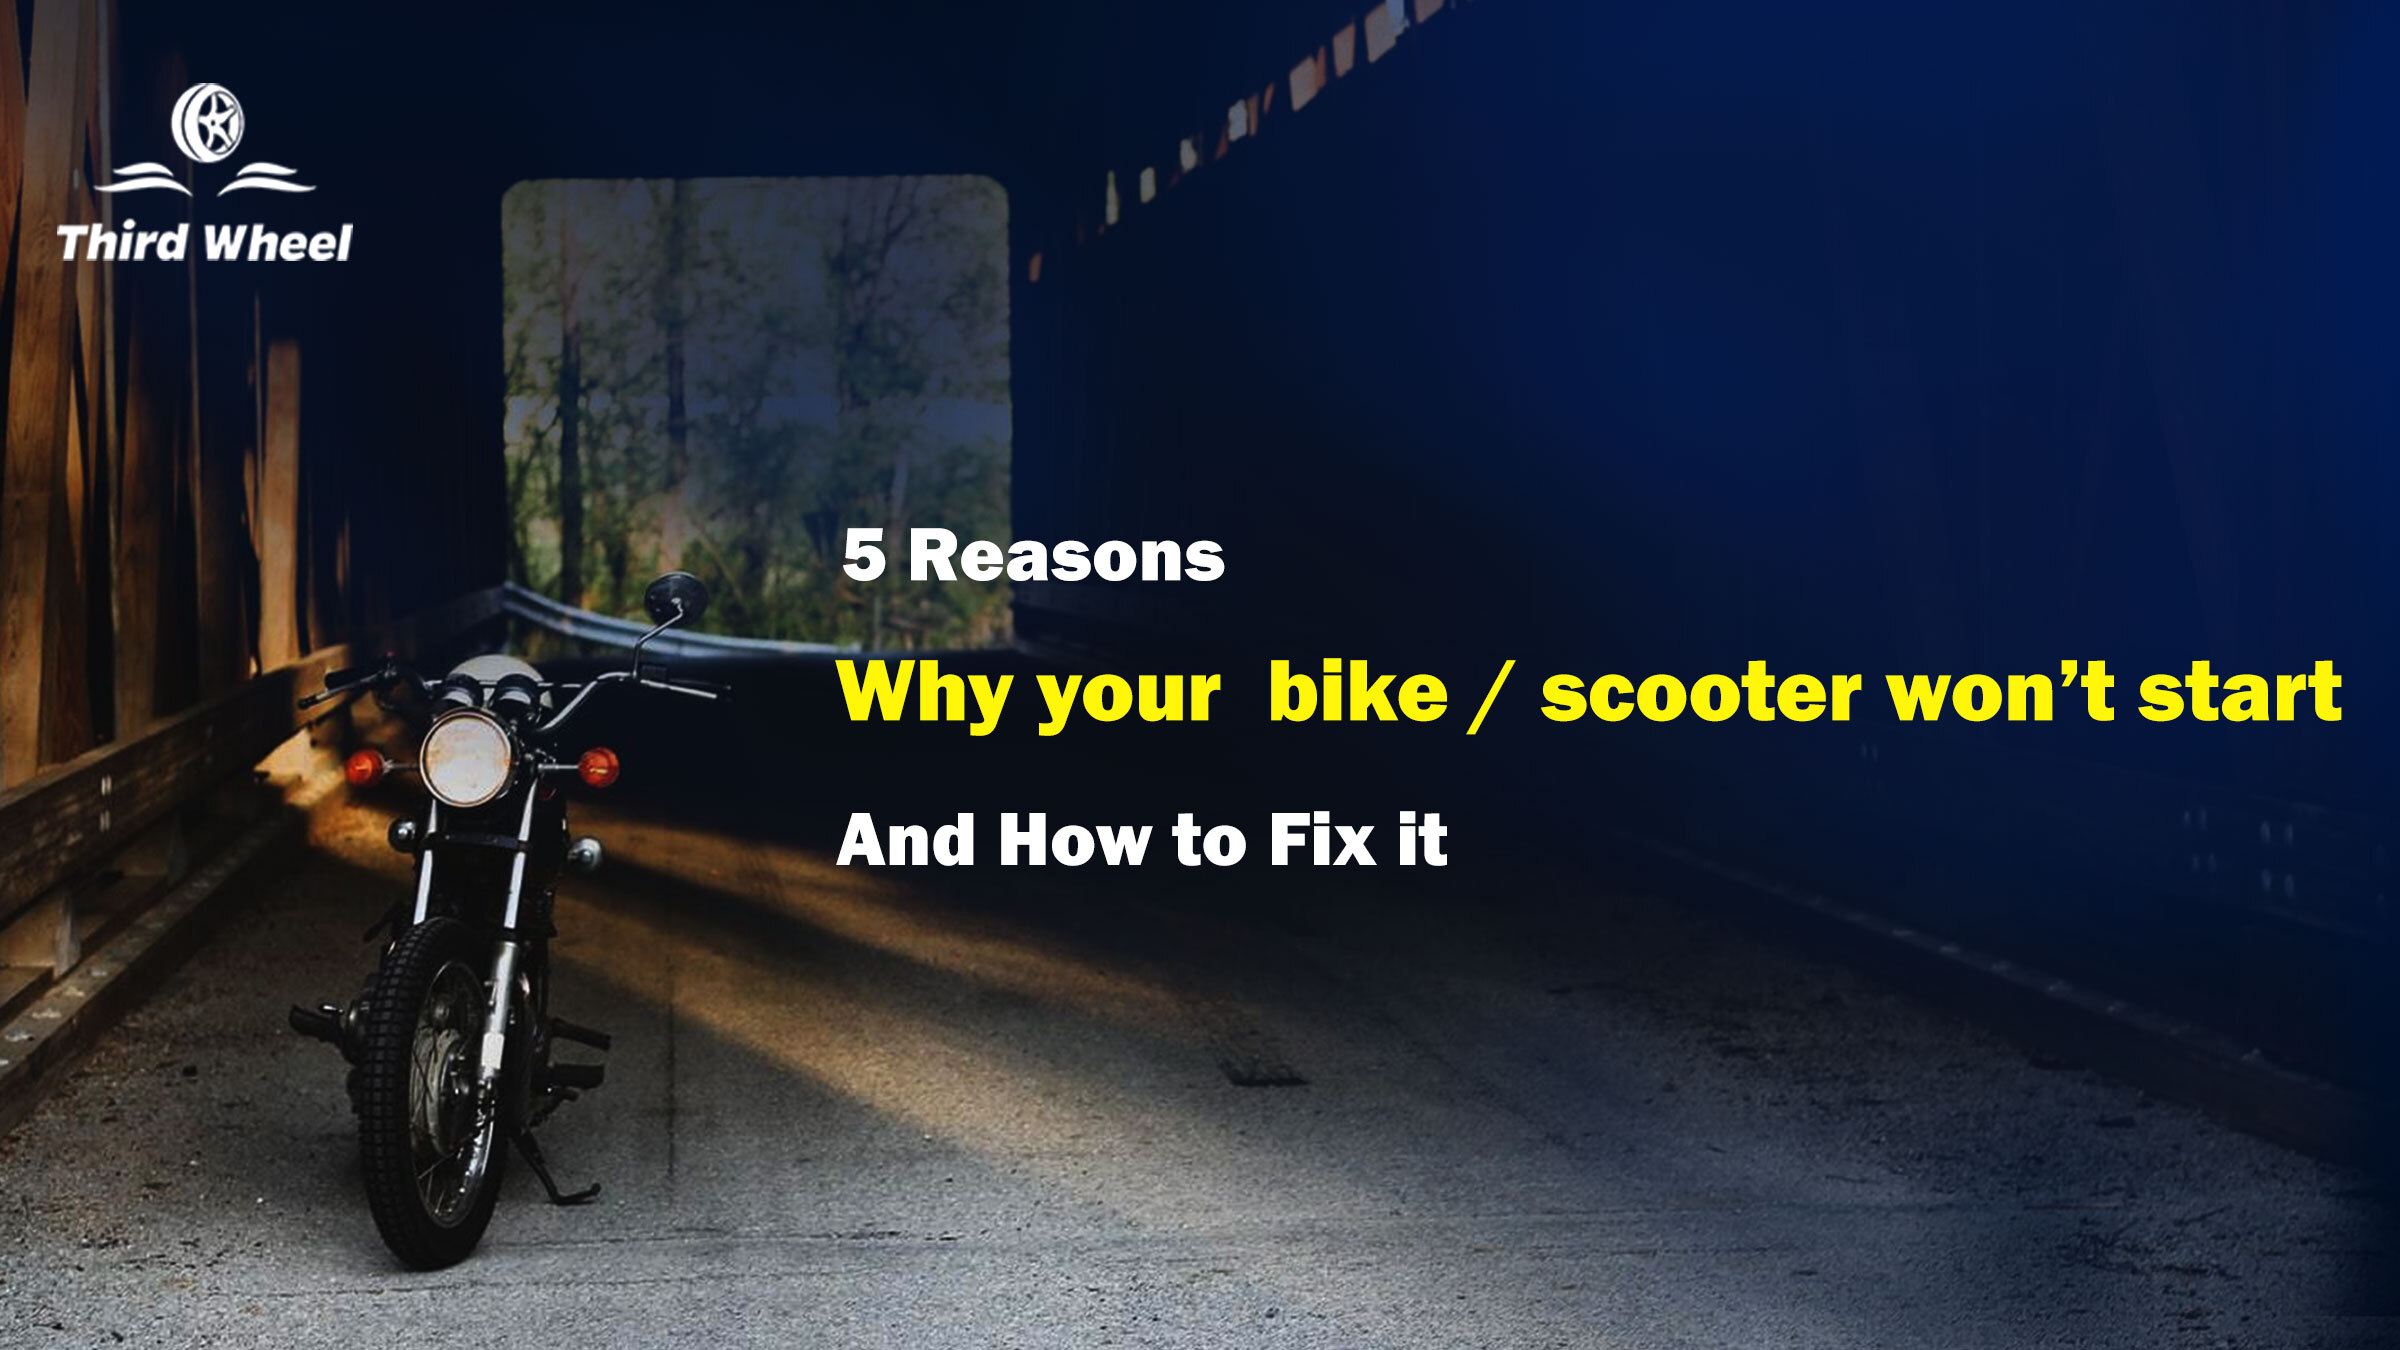 5 Reasons Why your bike / scooter won't start and How to fix it